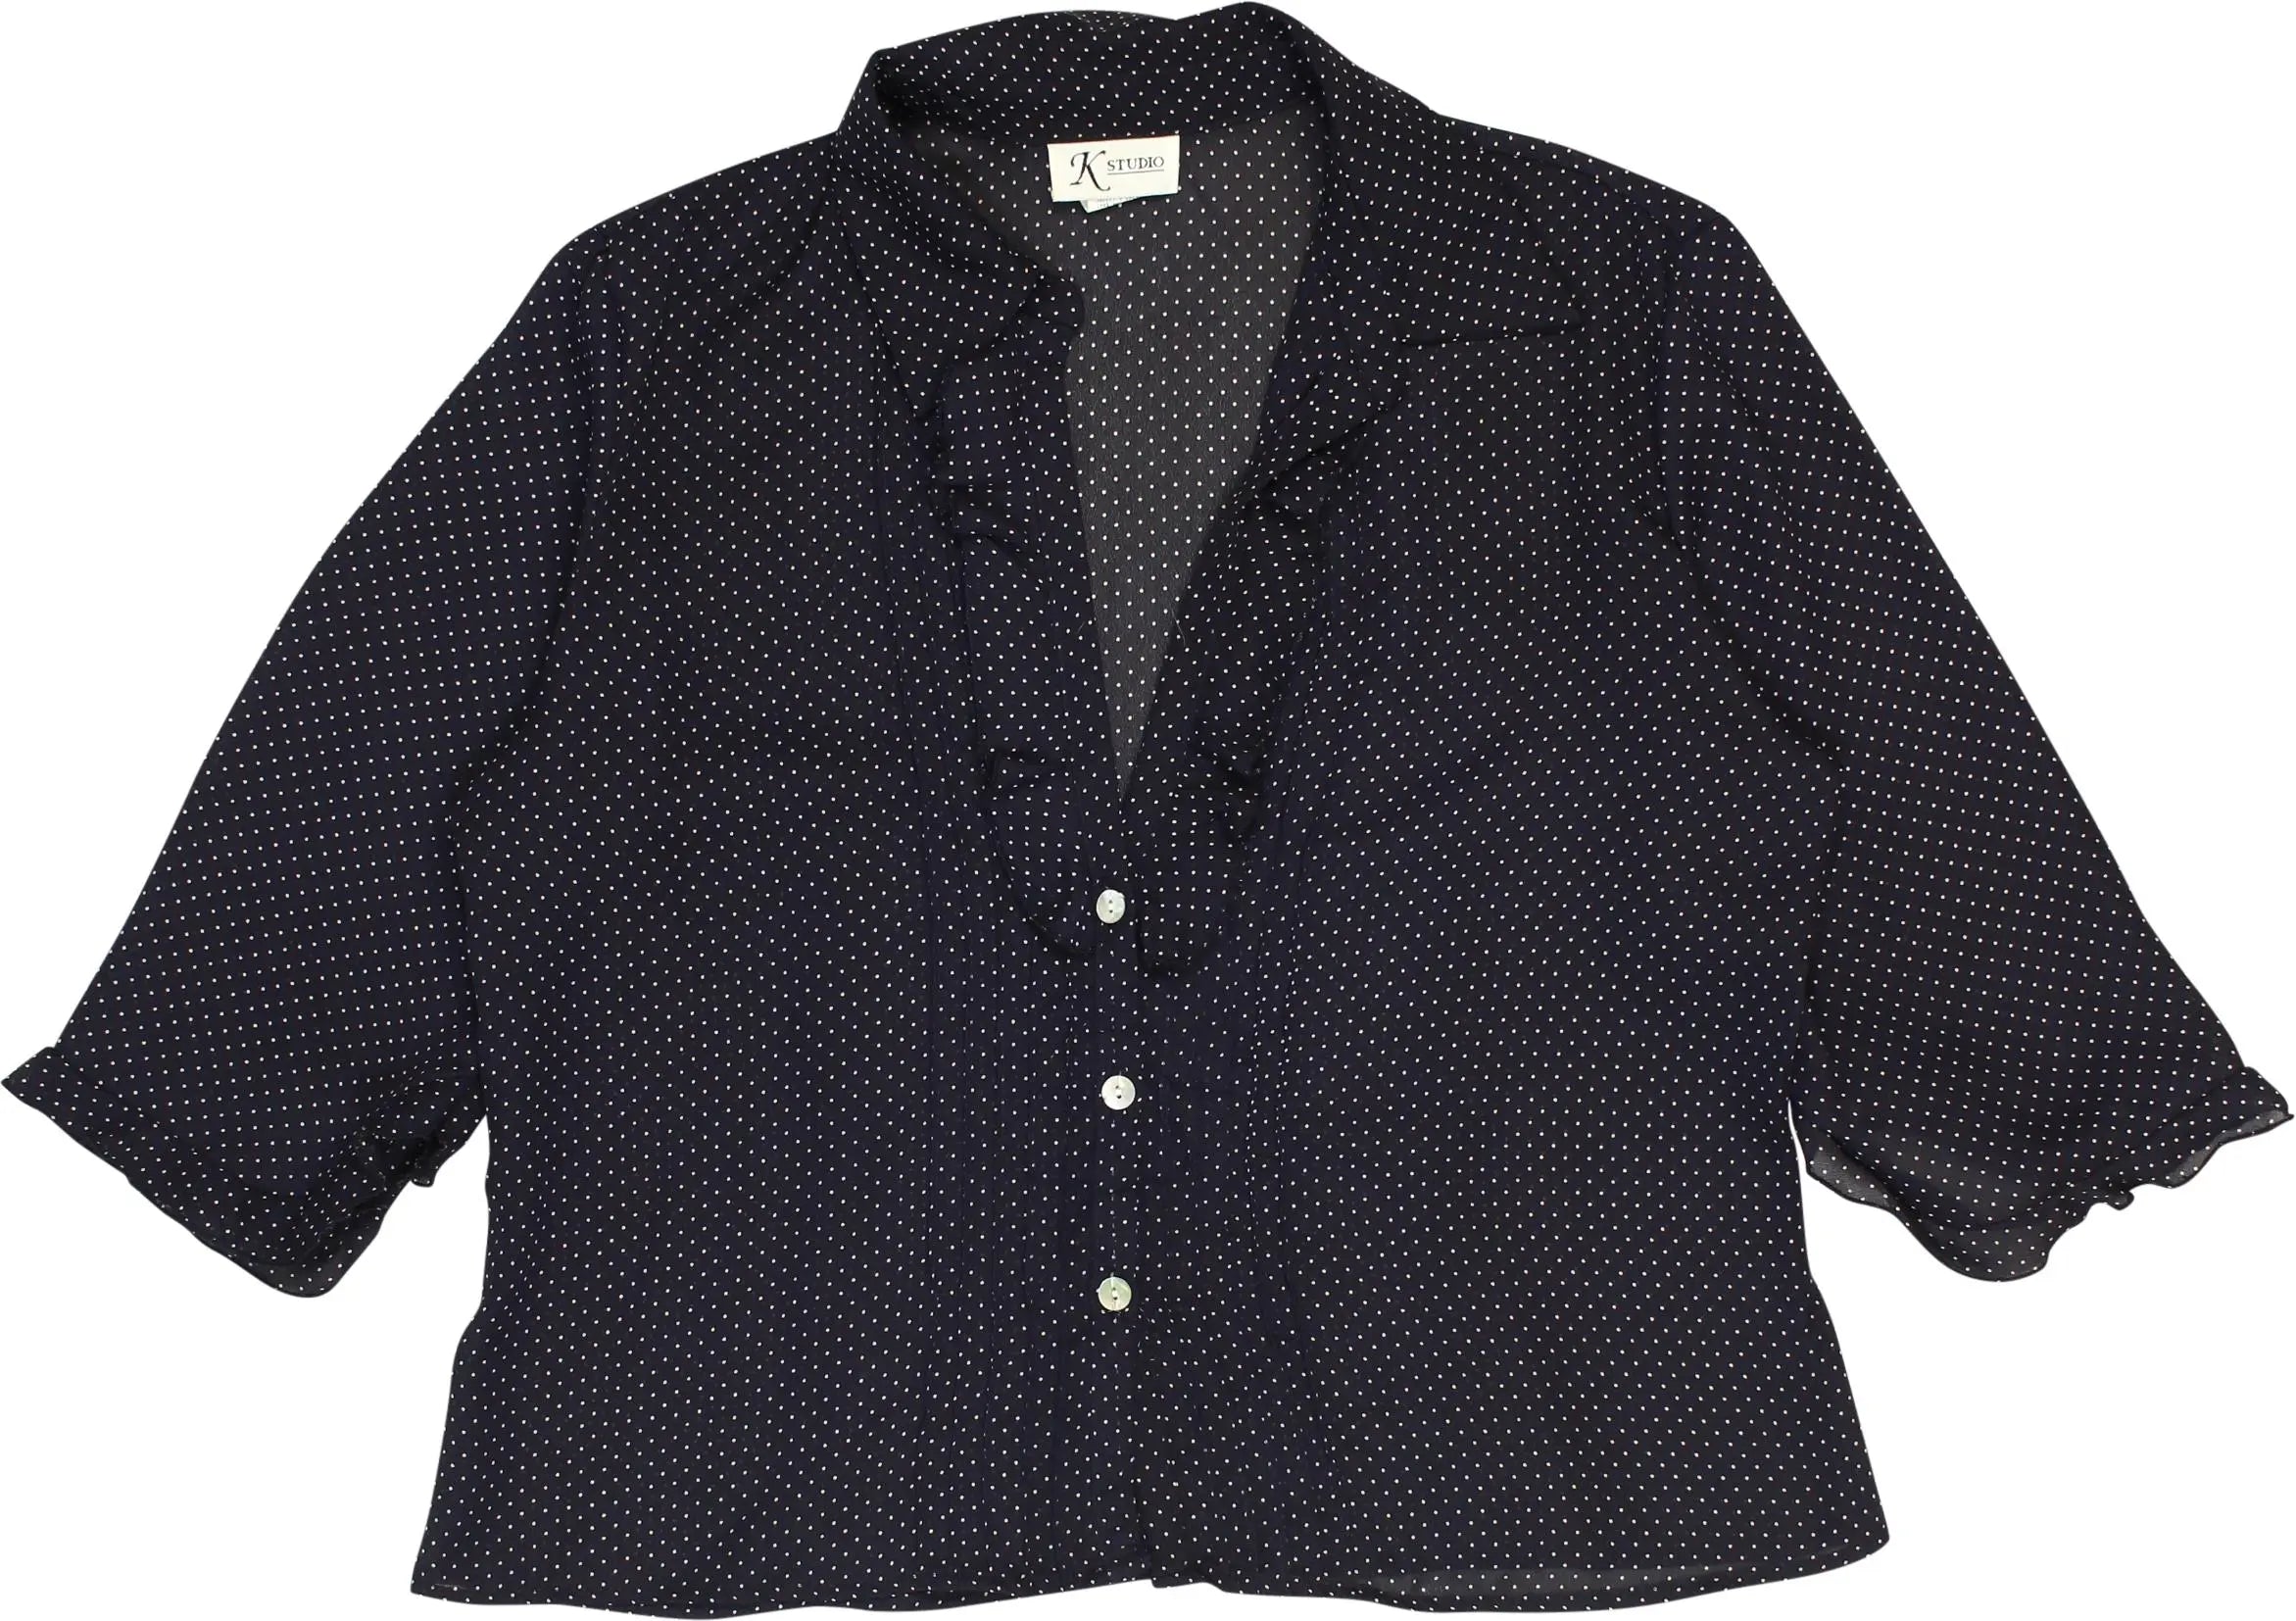 K studio - 90s Polka Dot Blouse- ThriftTale.com - Vintage and second handclothing